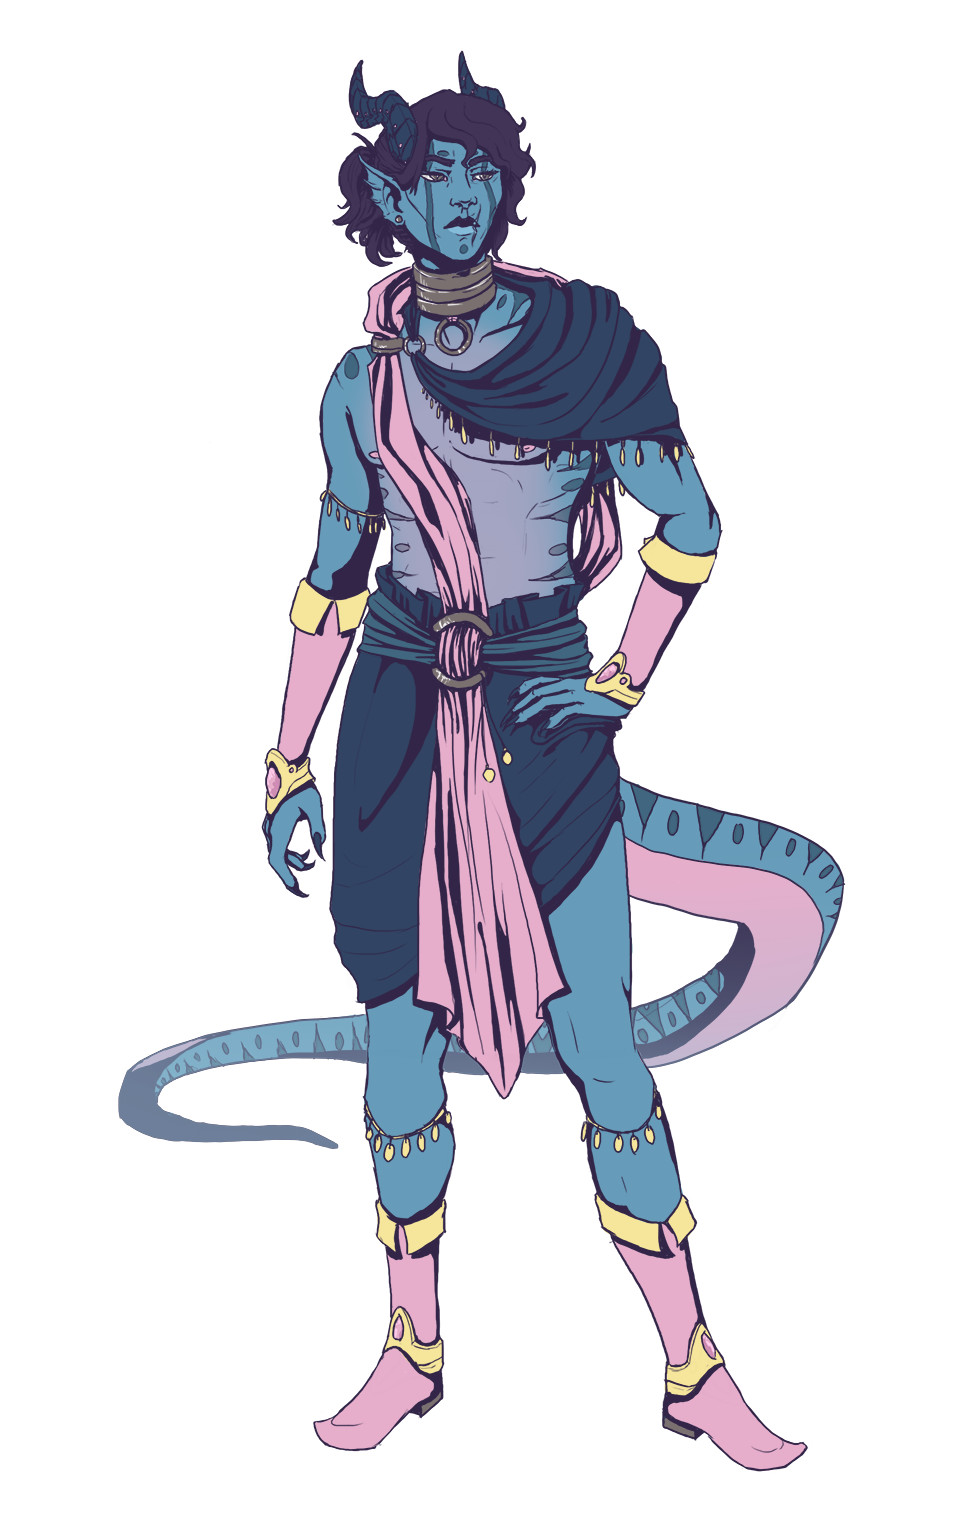 Commissioned design for a half-dragon DnD character.